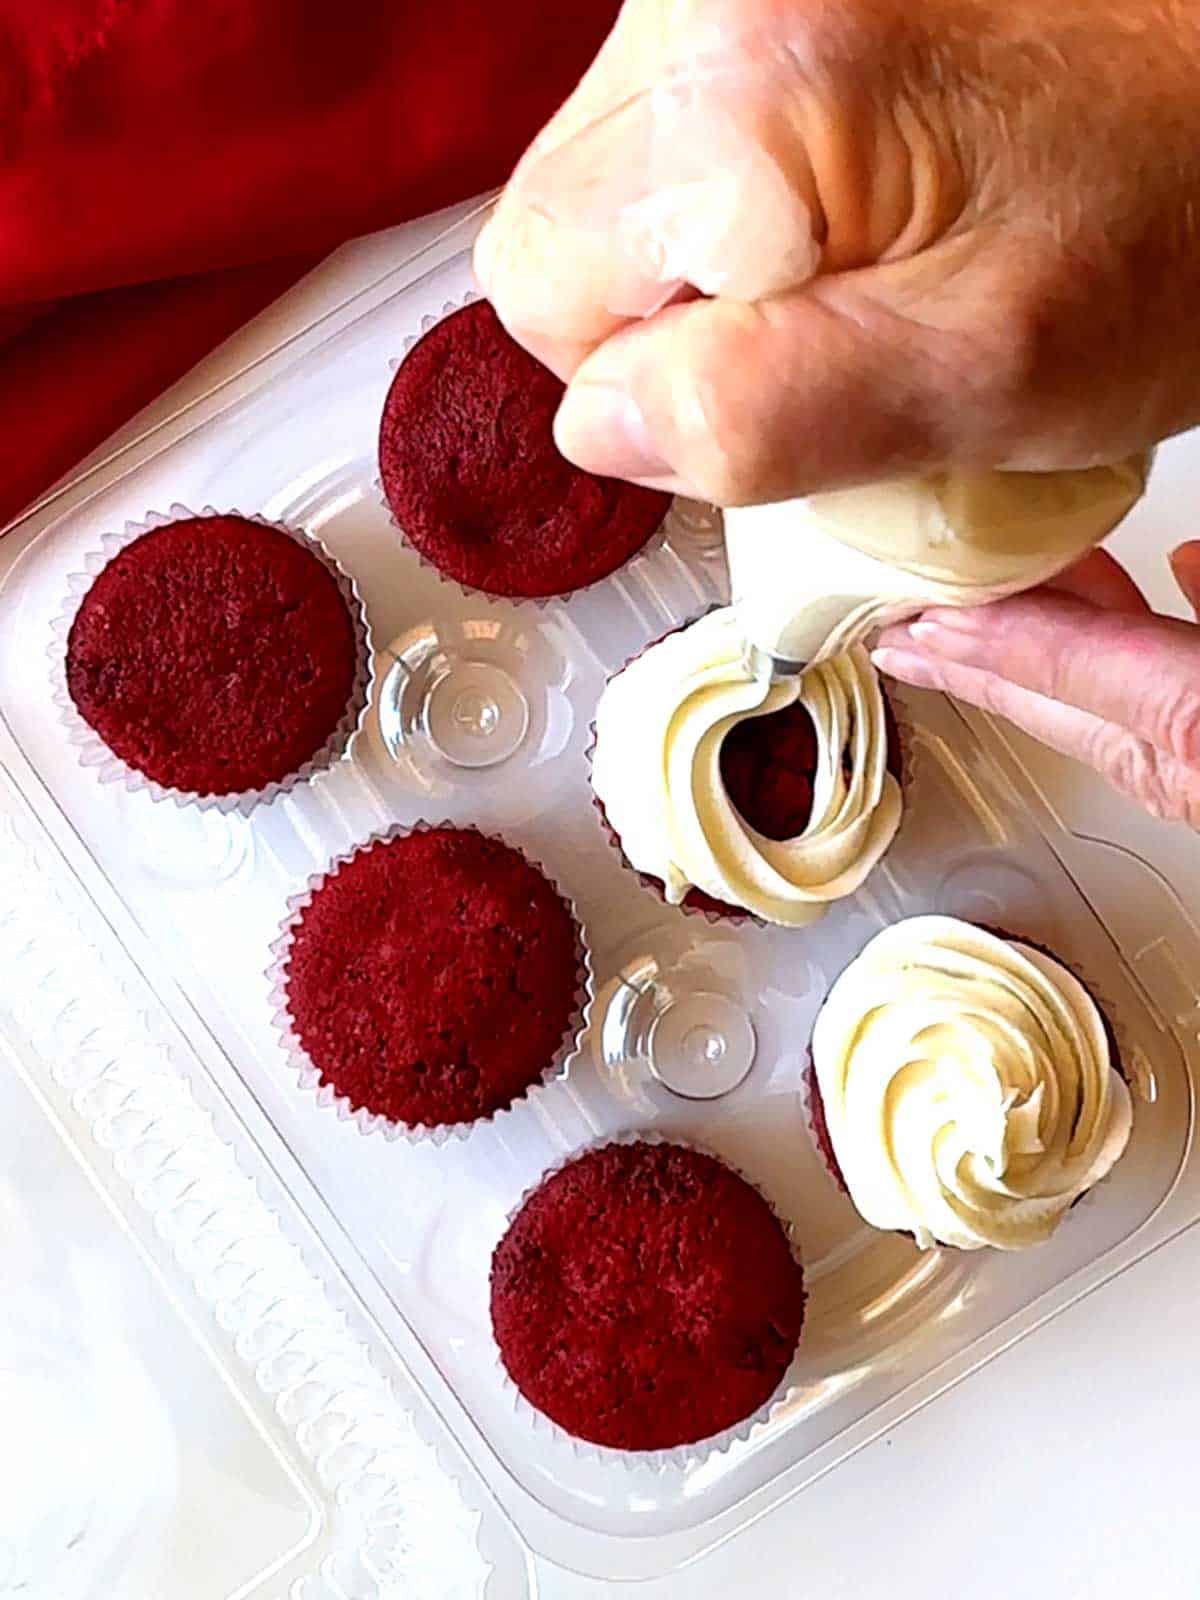 Piping frosting onto red velvet cupcakes